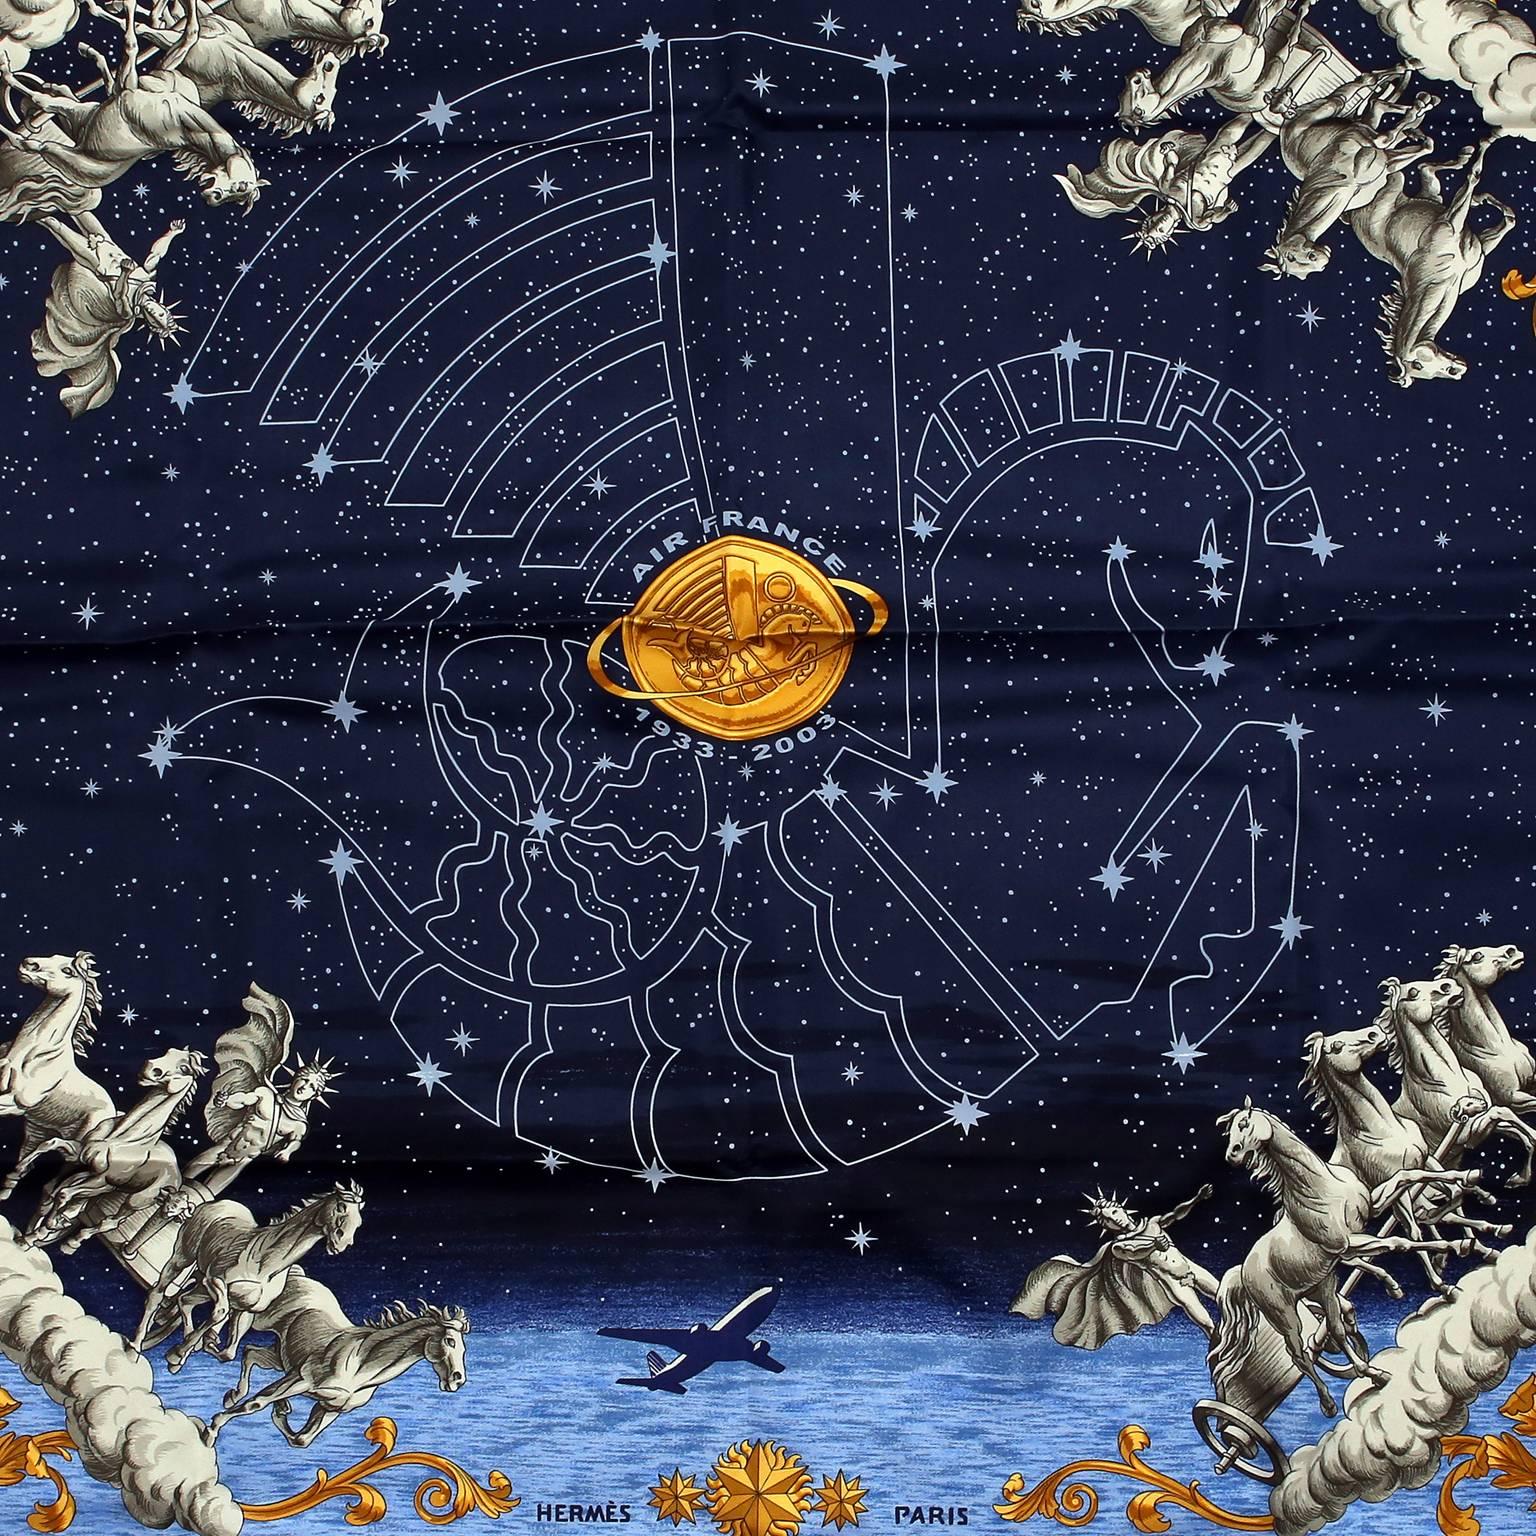 This authentic Hermès Cosmos 90 cm Silk Scarf is new with the original box. Originally designed by Philippe Ledoux in 1964, the print features a midnight blue celestial sky with a hippocampus constellation.  The Limited Edition reissue design